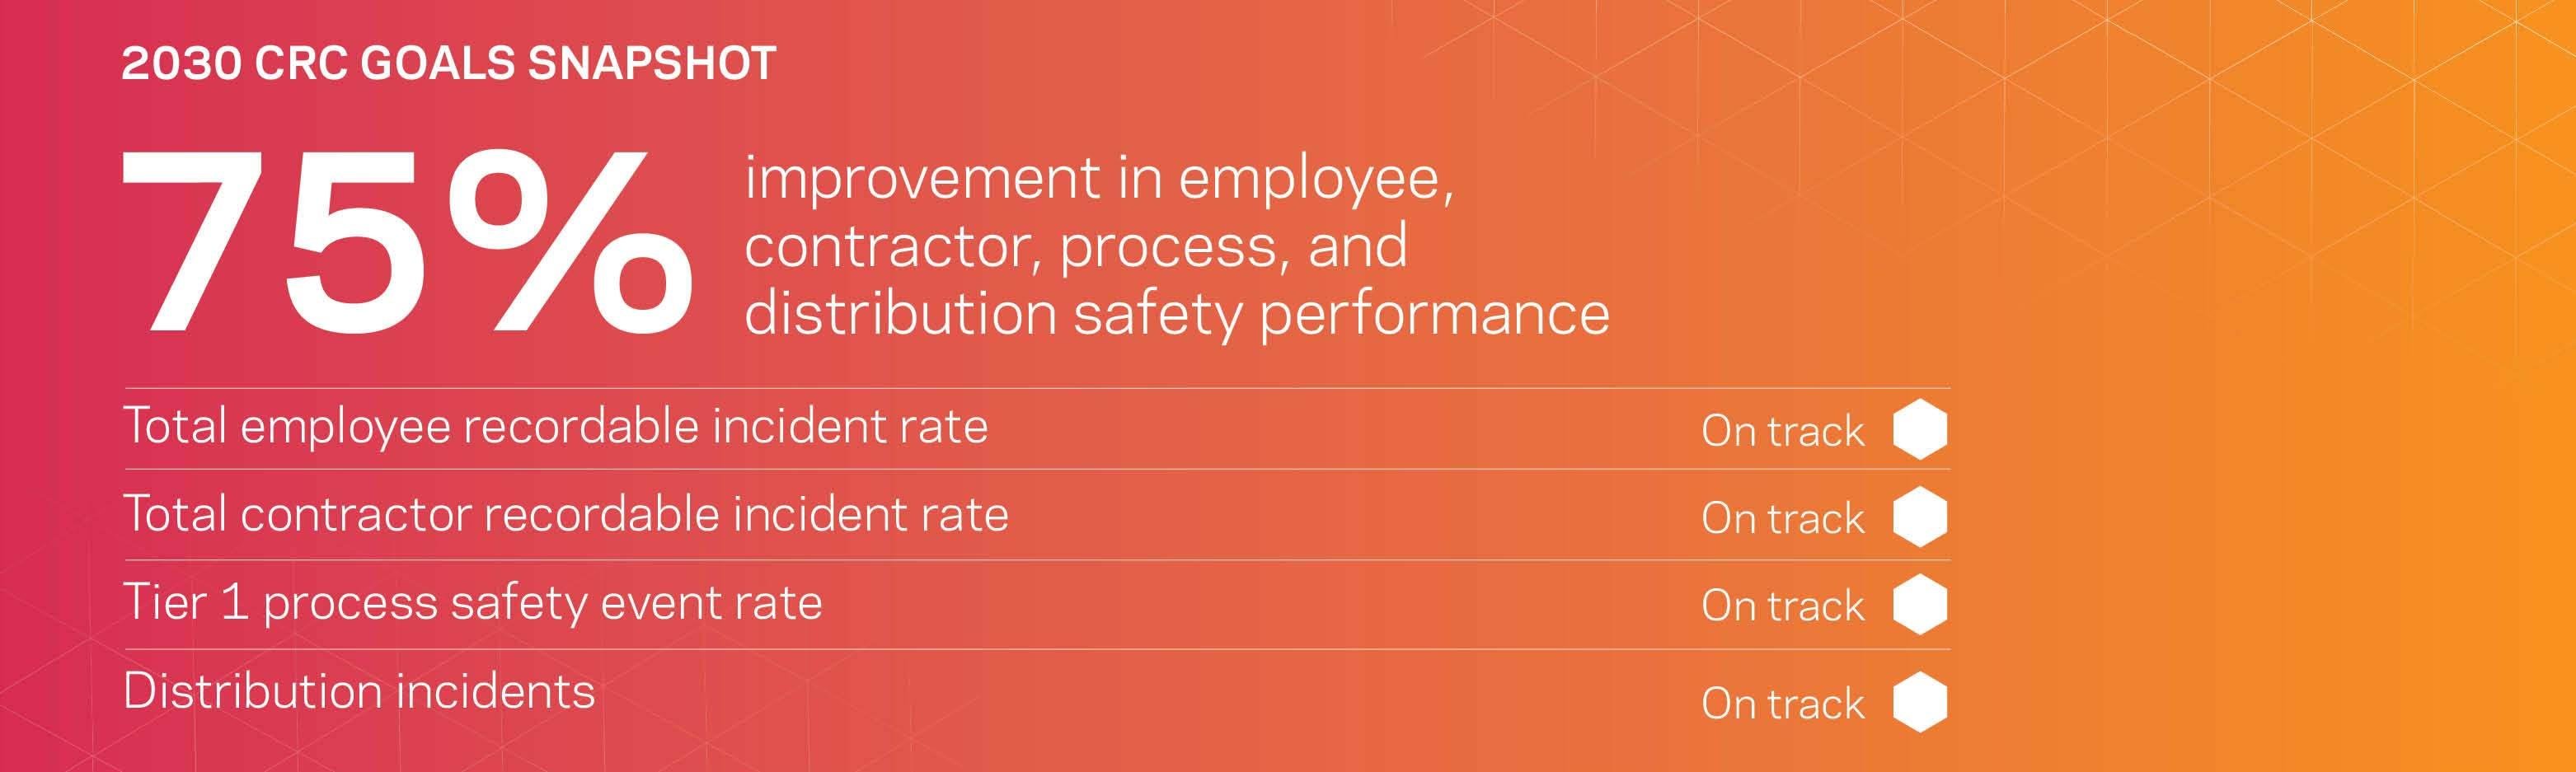 75% improvement in employee, contractor, process, and distribution safety performance